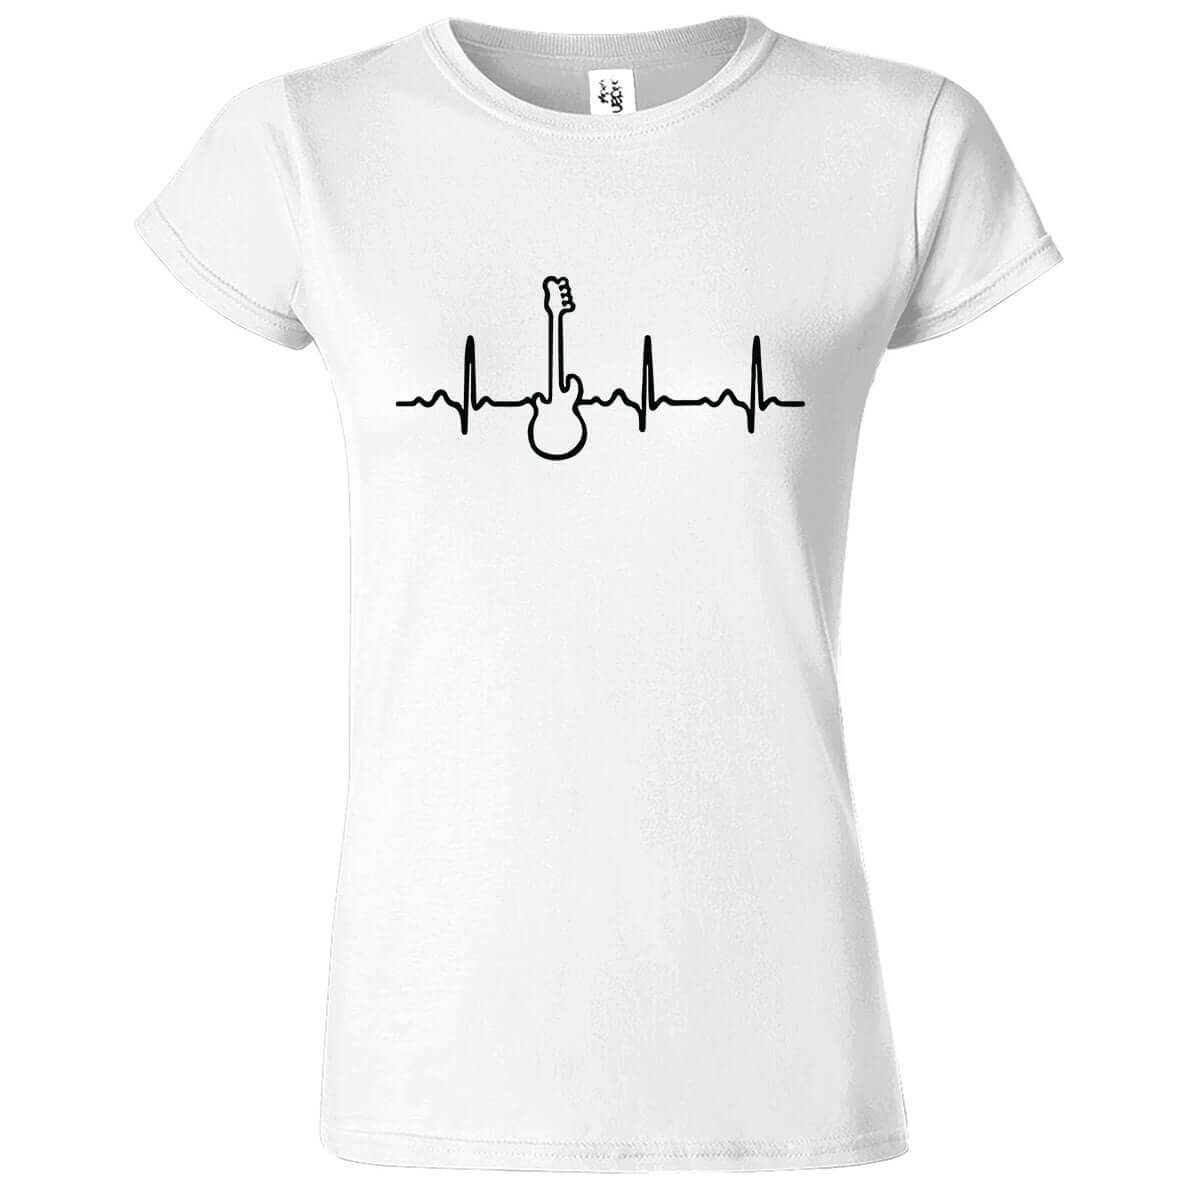 Guitar Sound Printed T-Shirt for Women's - ApparelinClick